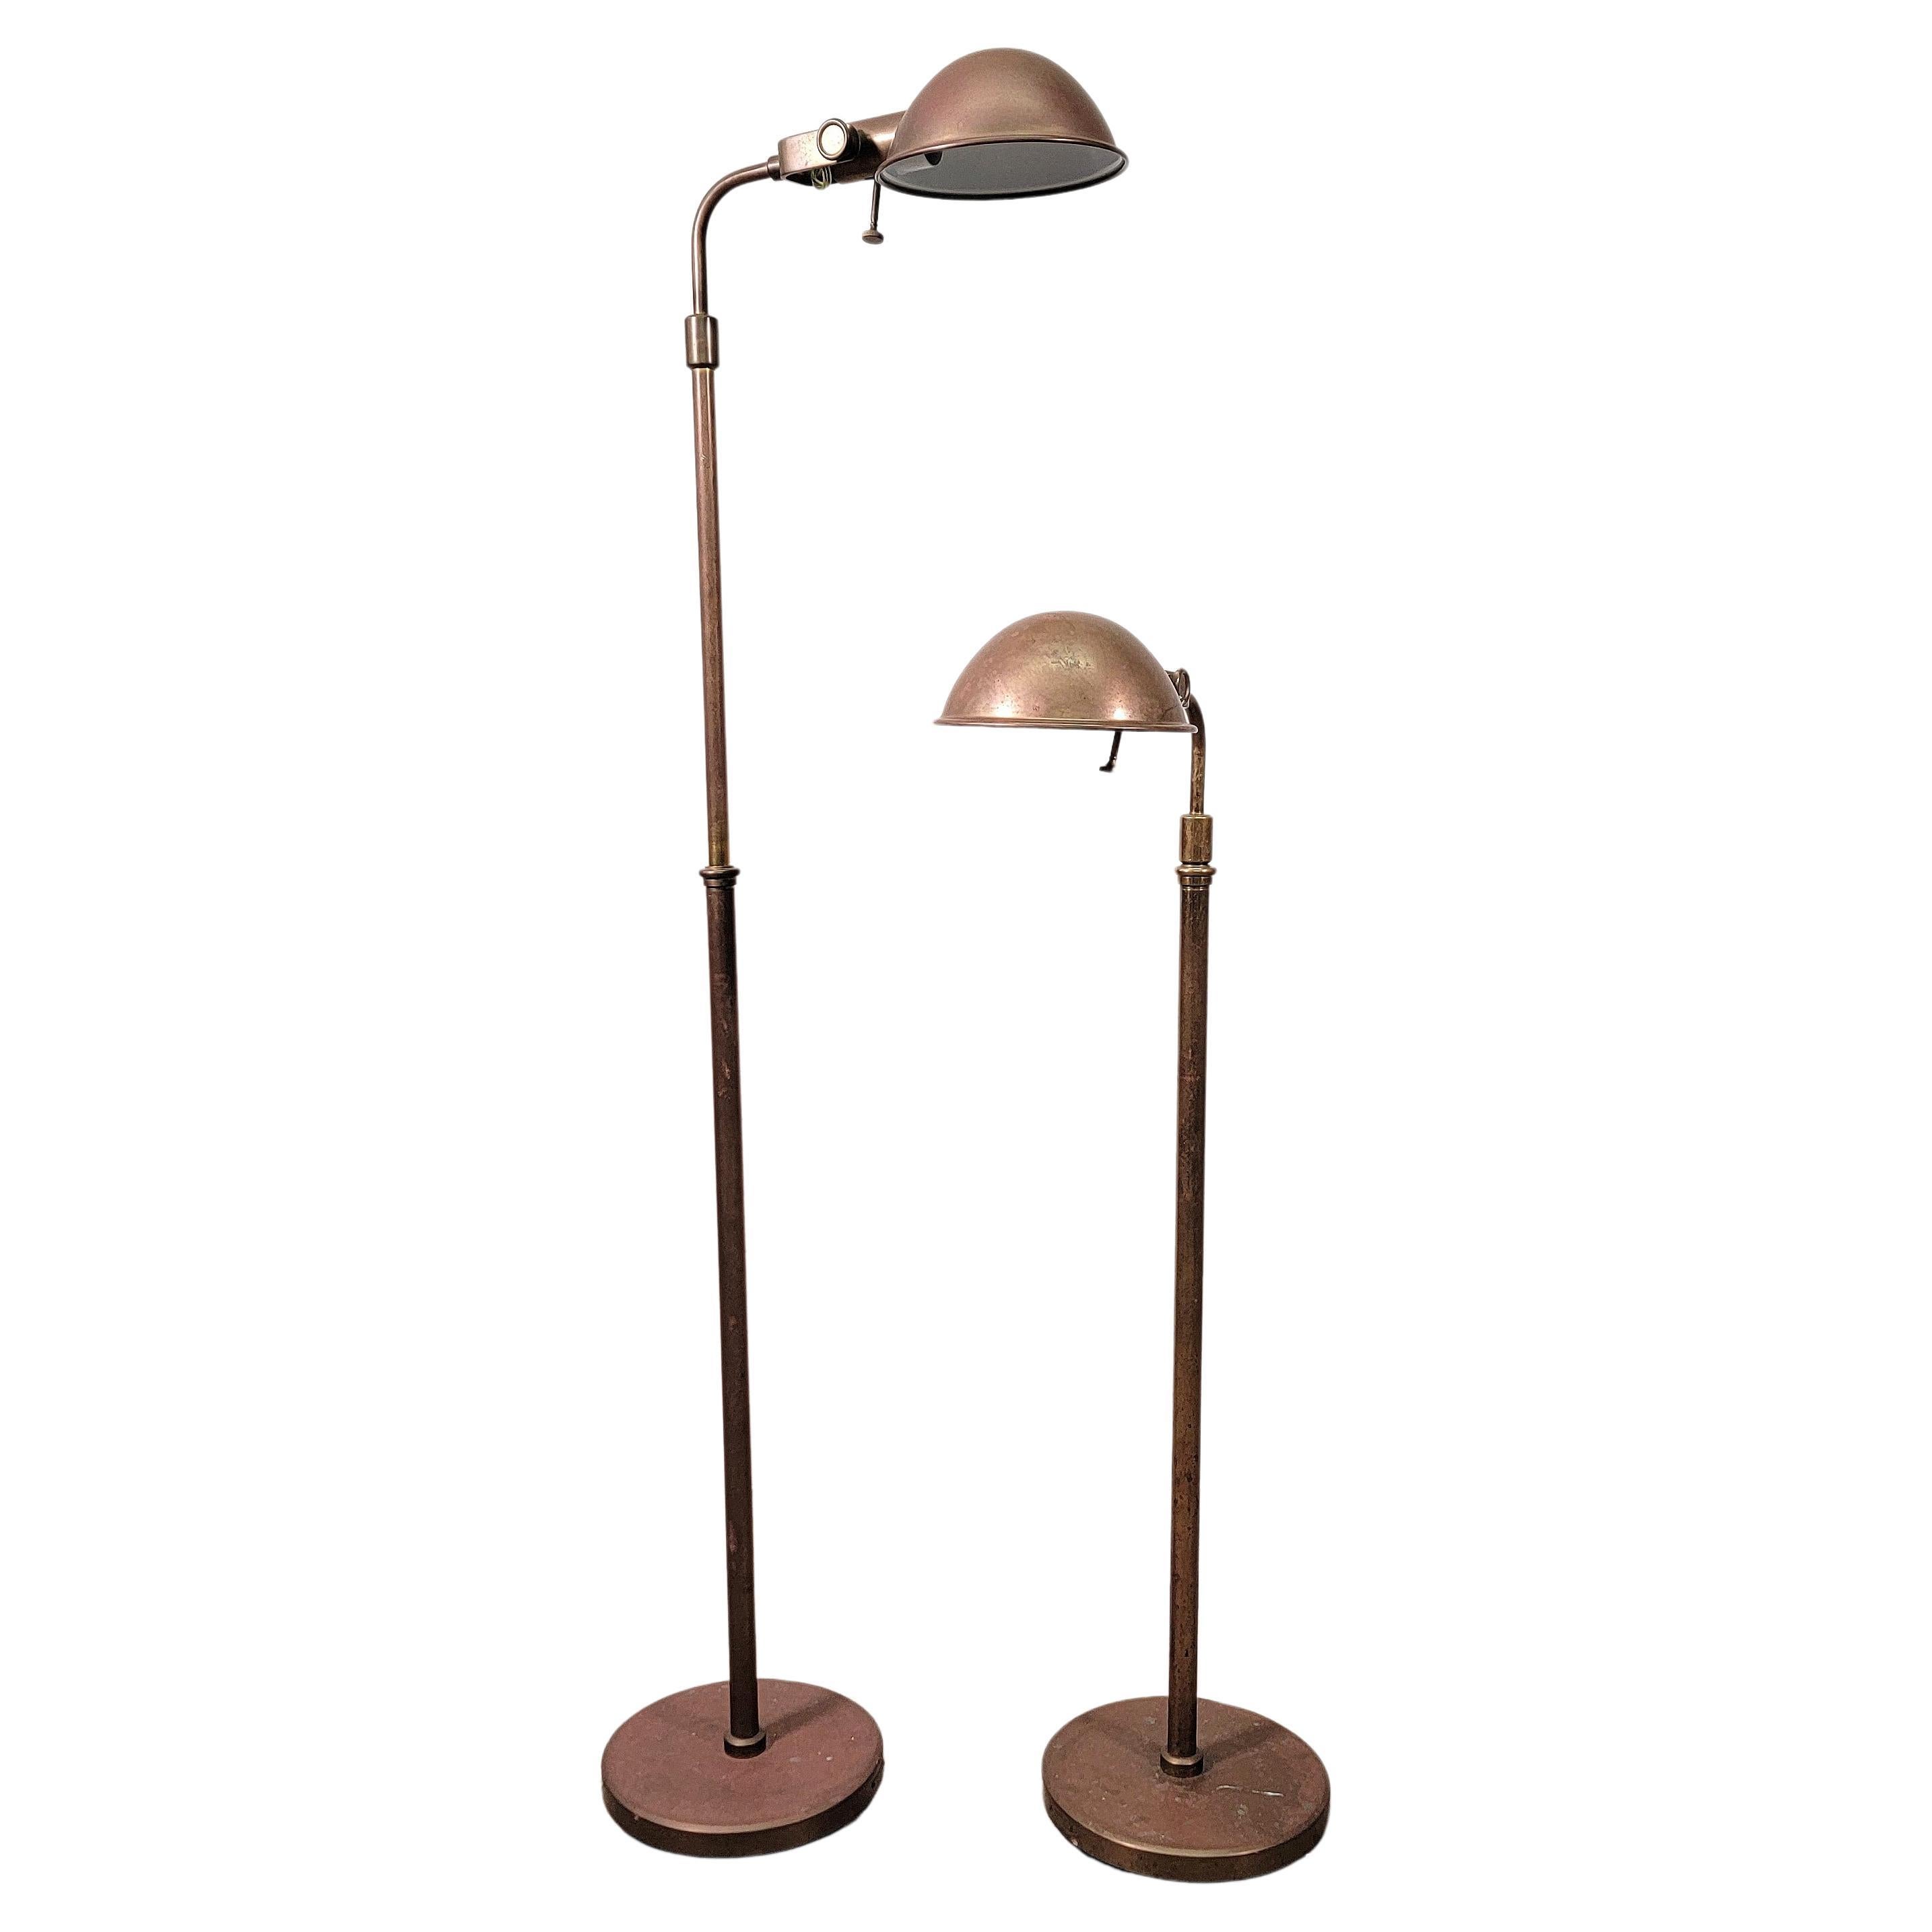 Pair of traditional brass pharmacy floor lamps by Ralph Lauren. The patinated brass lamps features adjustable height, arms and dome shades. The height ranges from approximately 41 in (around 104 cm) to 56 in (142.24 cm) total maximum height. Local